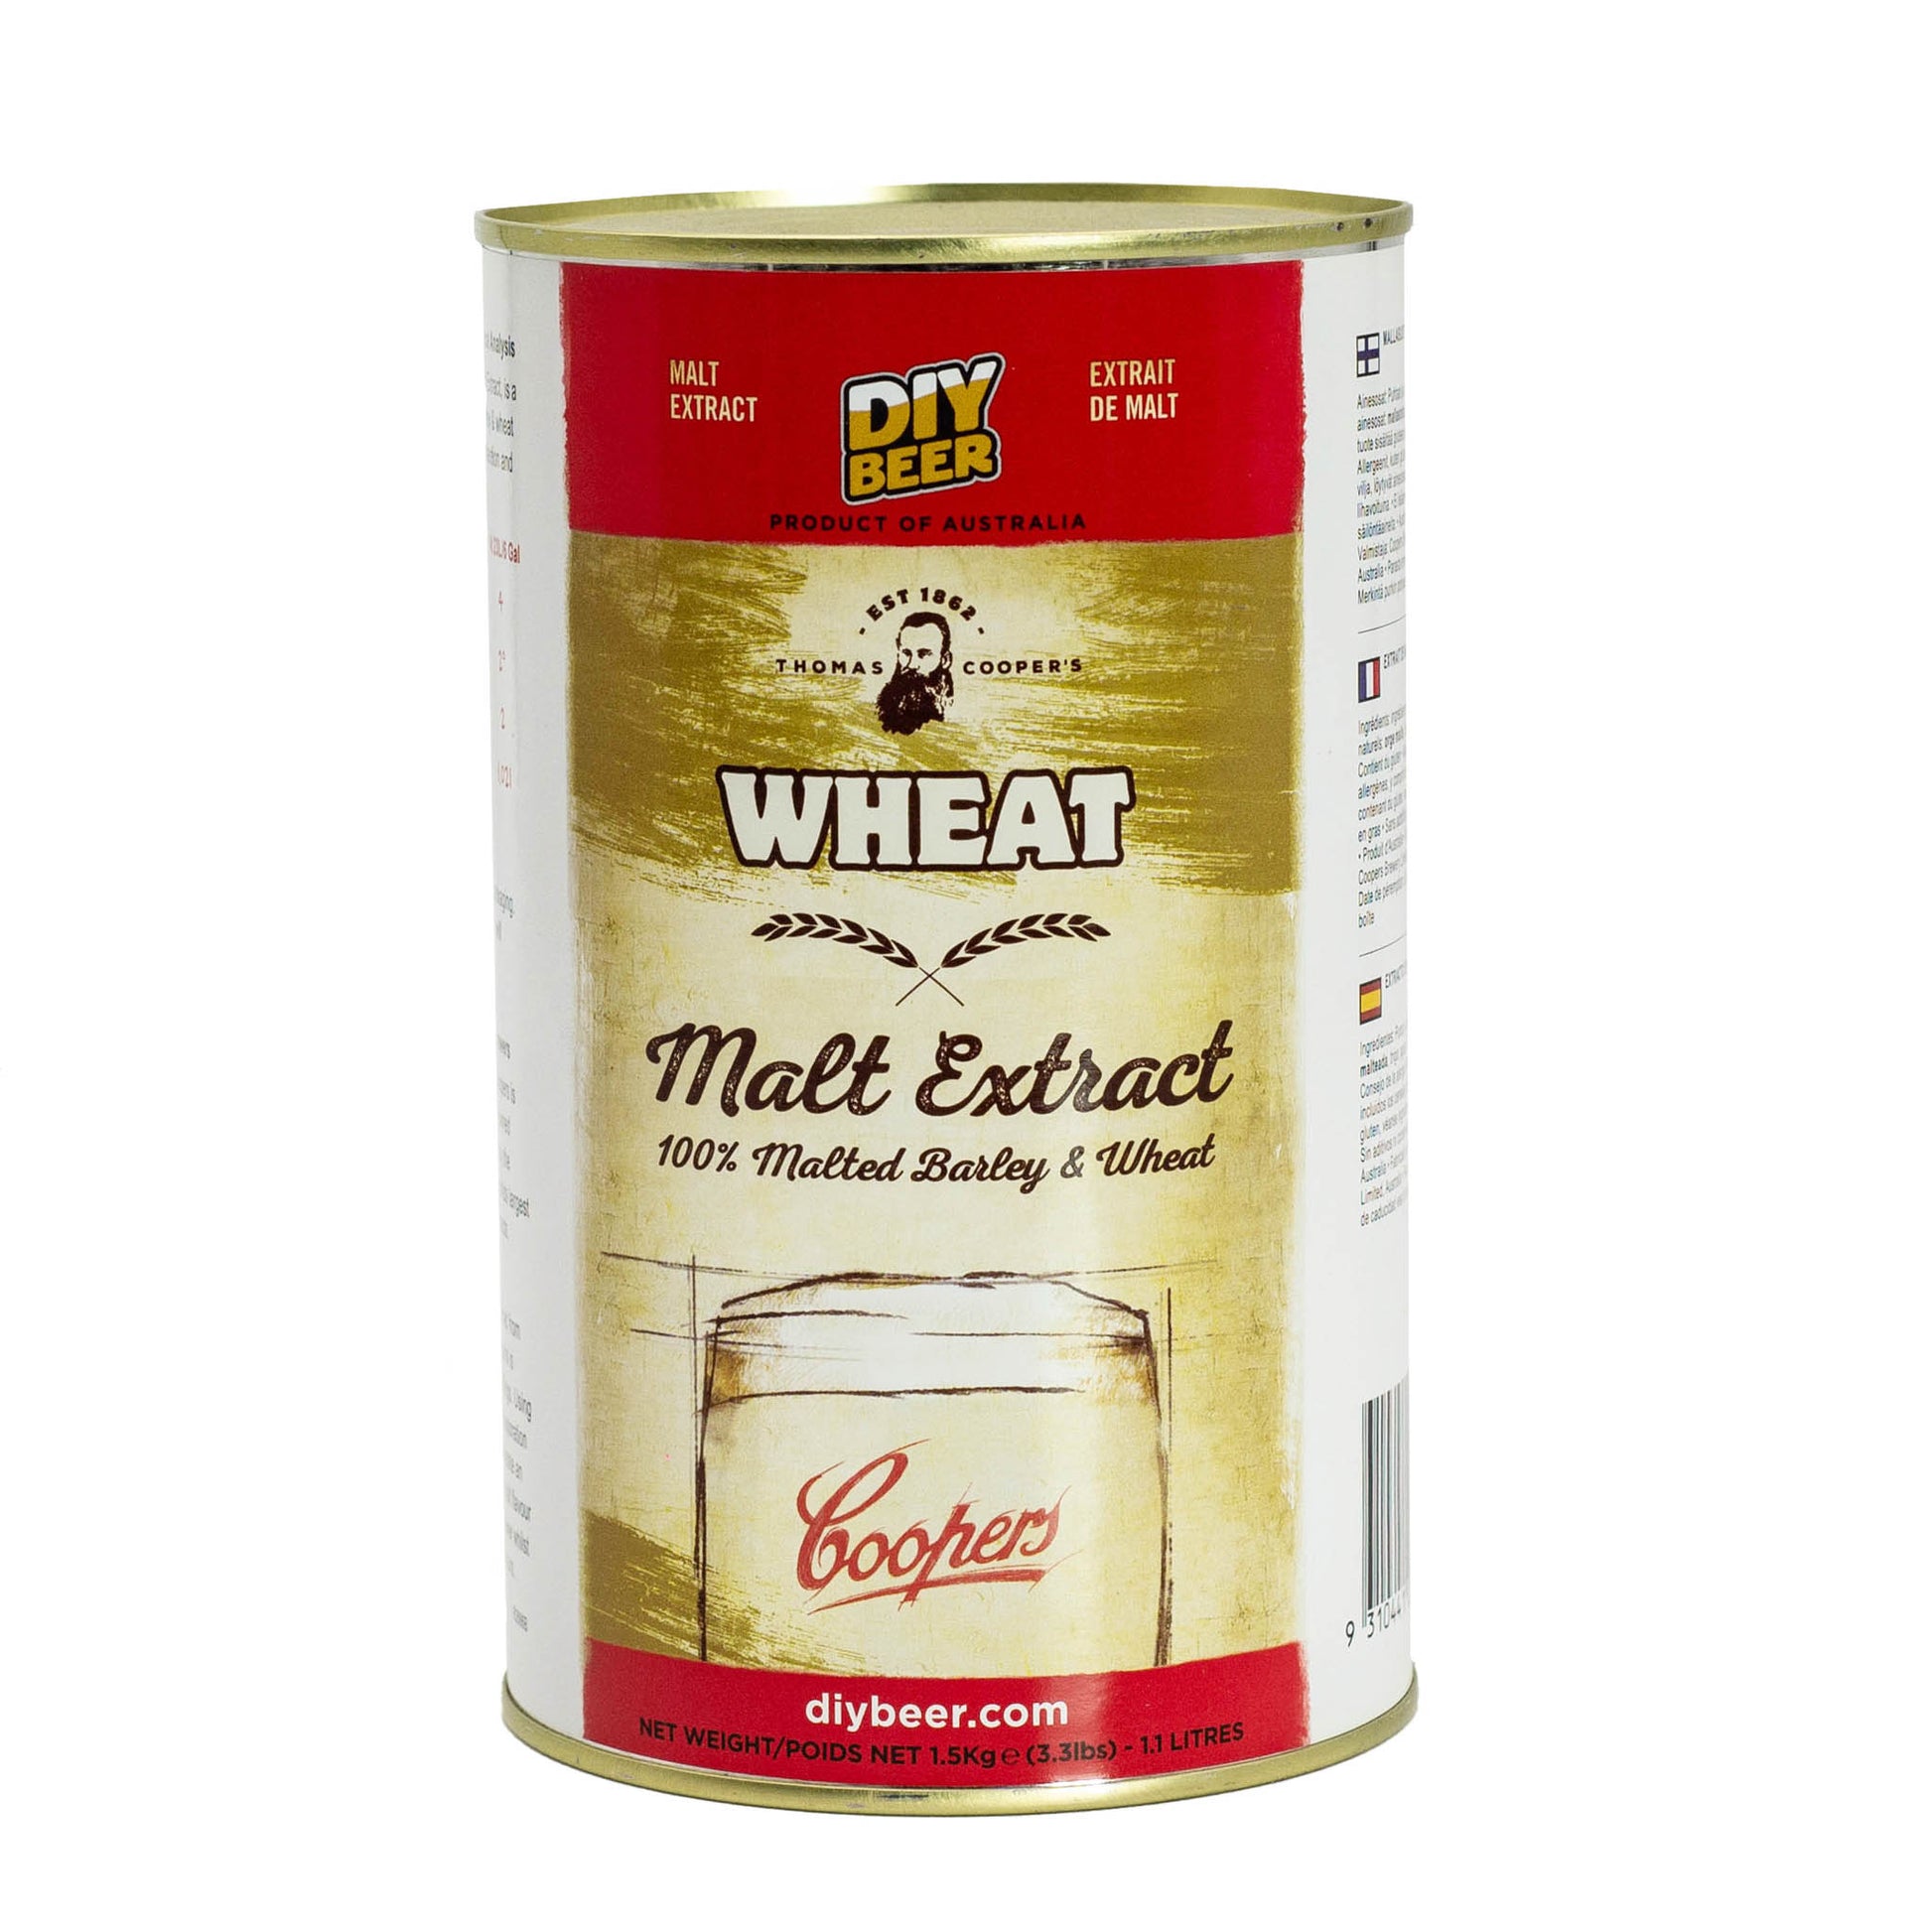 thomas coopers wheat malt extract brew tin is a high quality 100% malted barley & wheat extract that improves head retention and delivers a softer mouthfeel